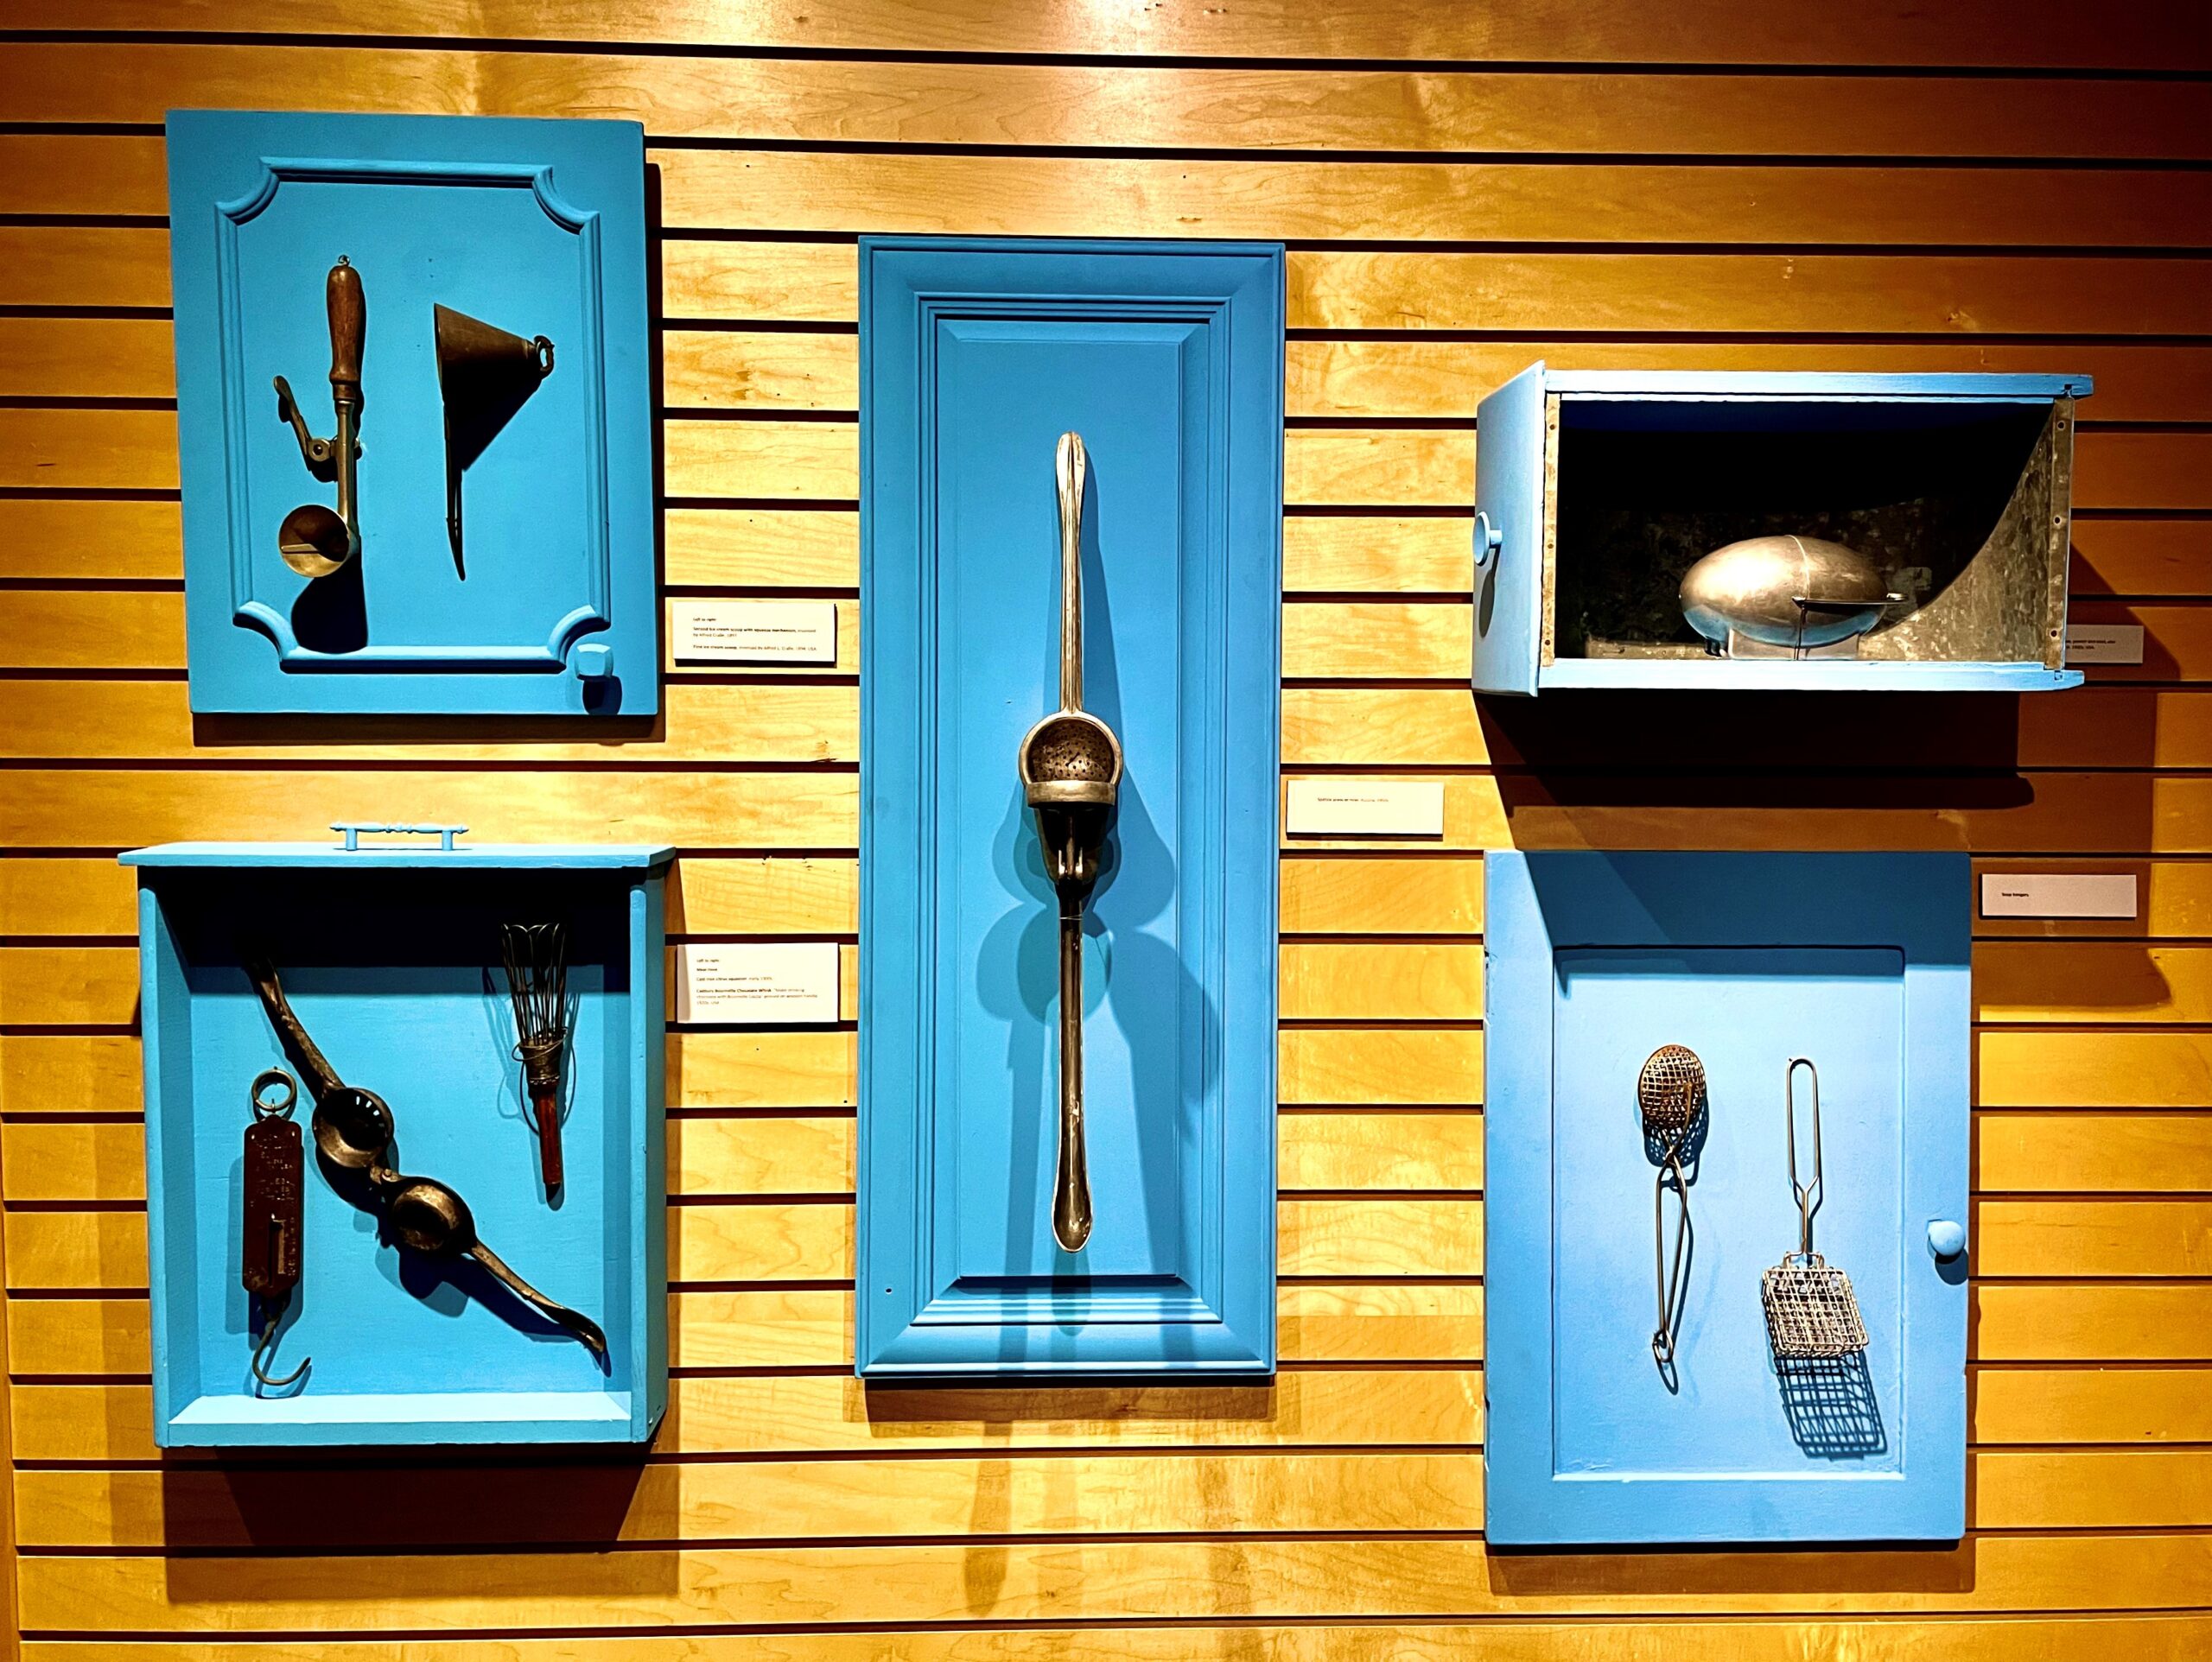 Kitchen Gizmos & Gadgets from the Kathleen Thompson Hill Culinary Collection